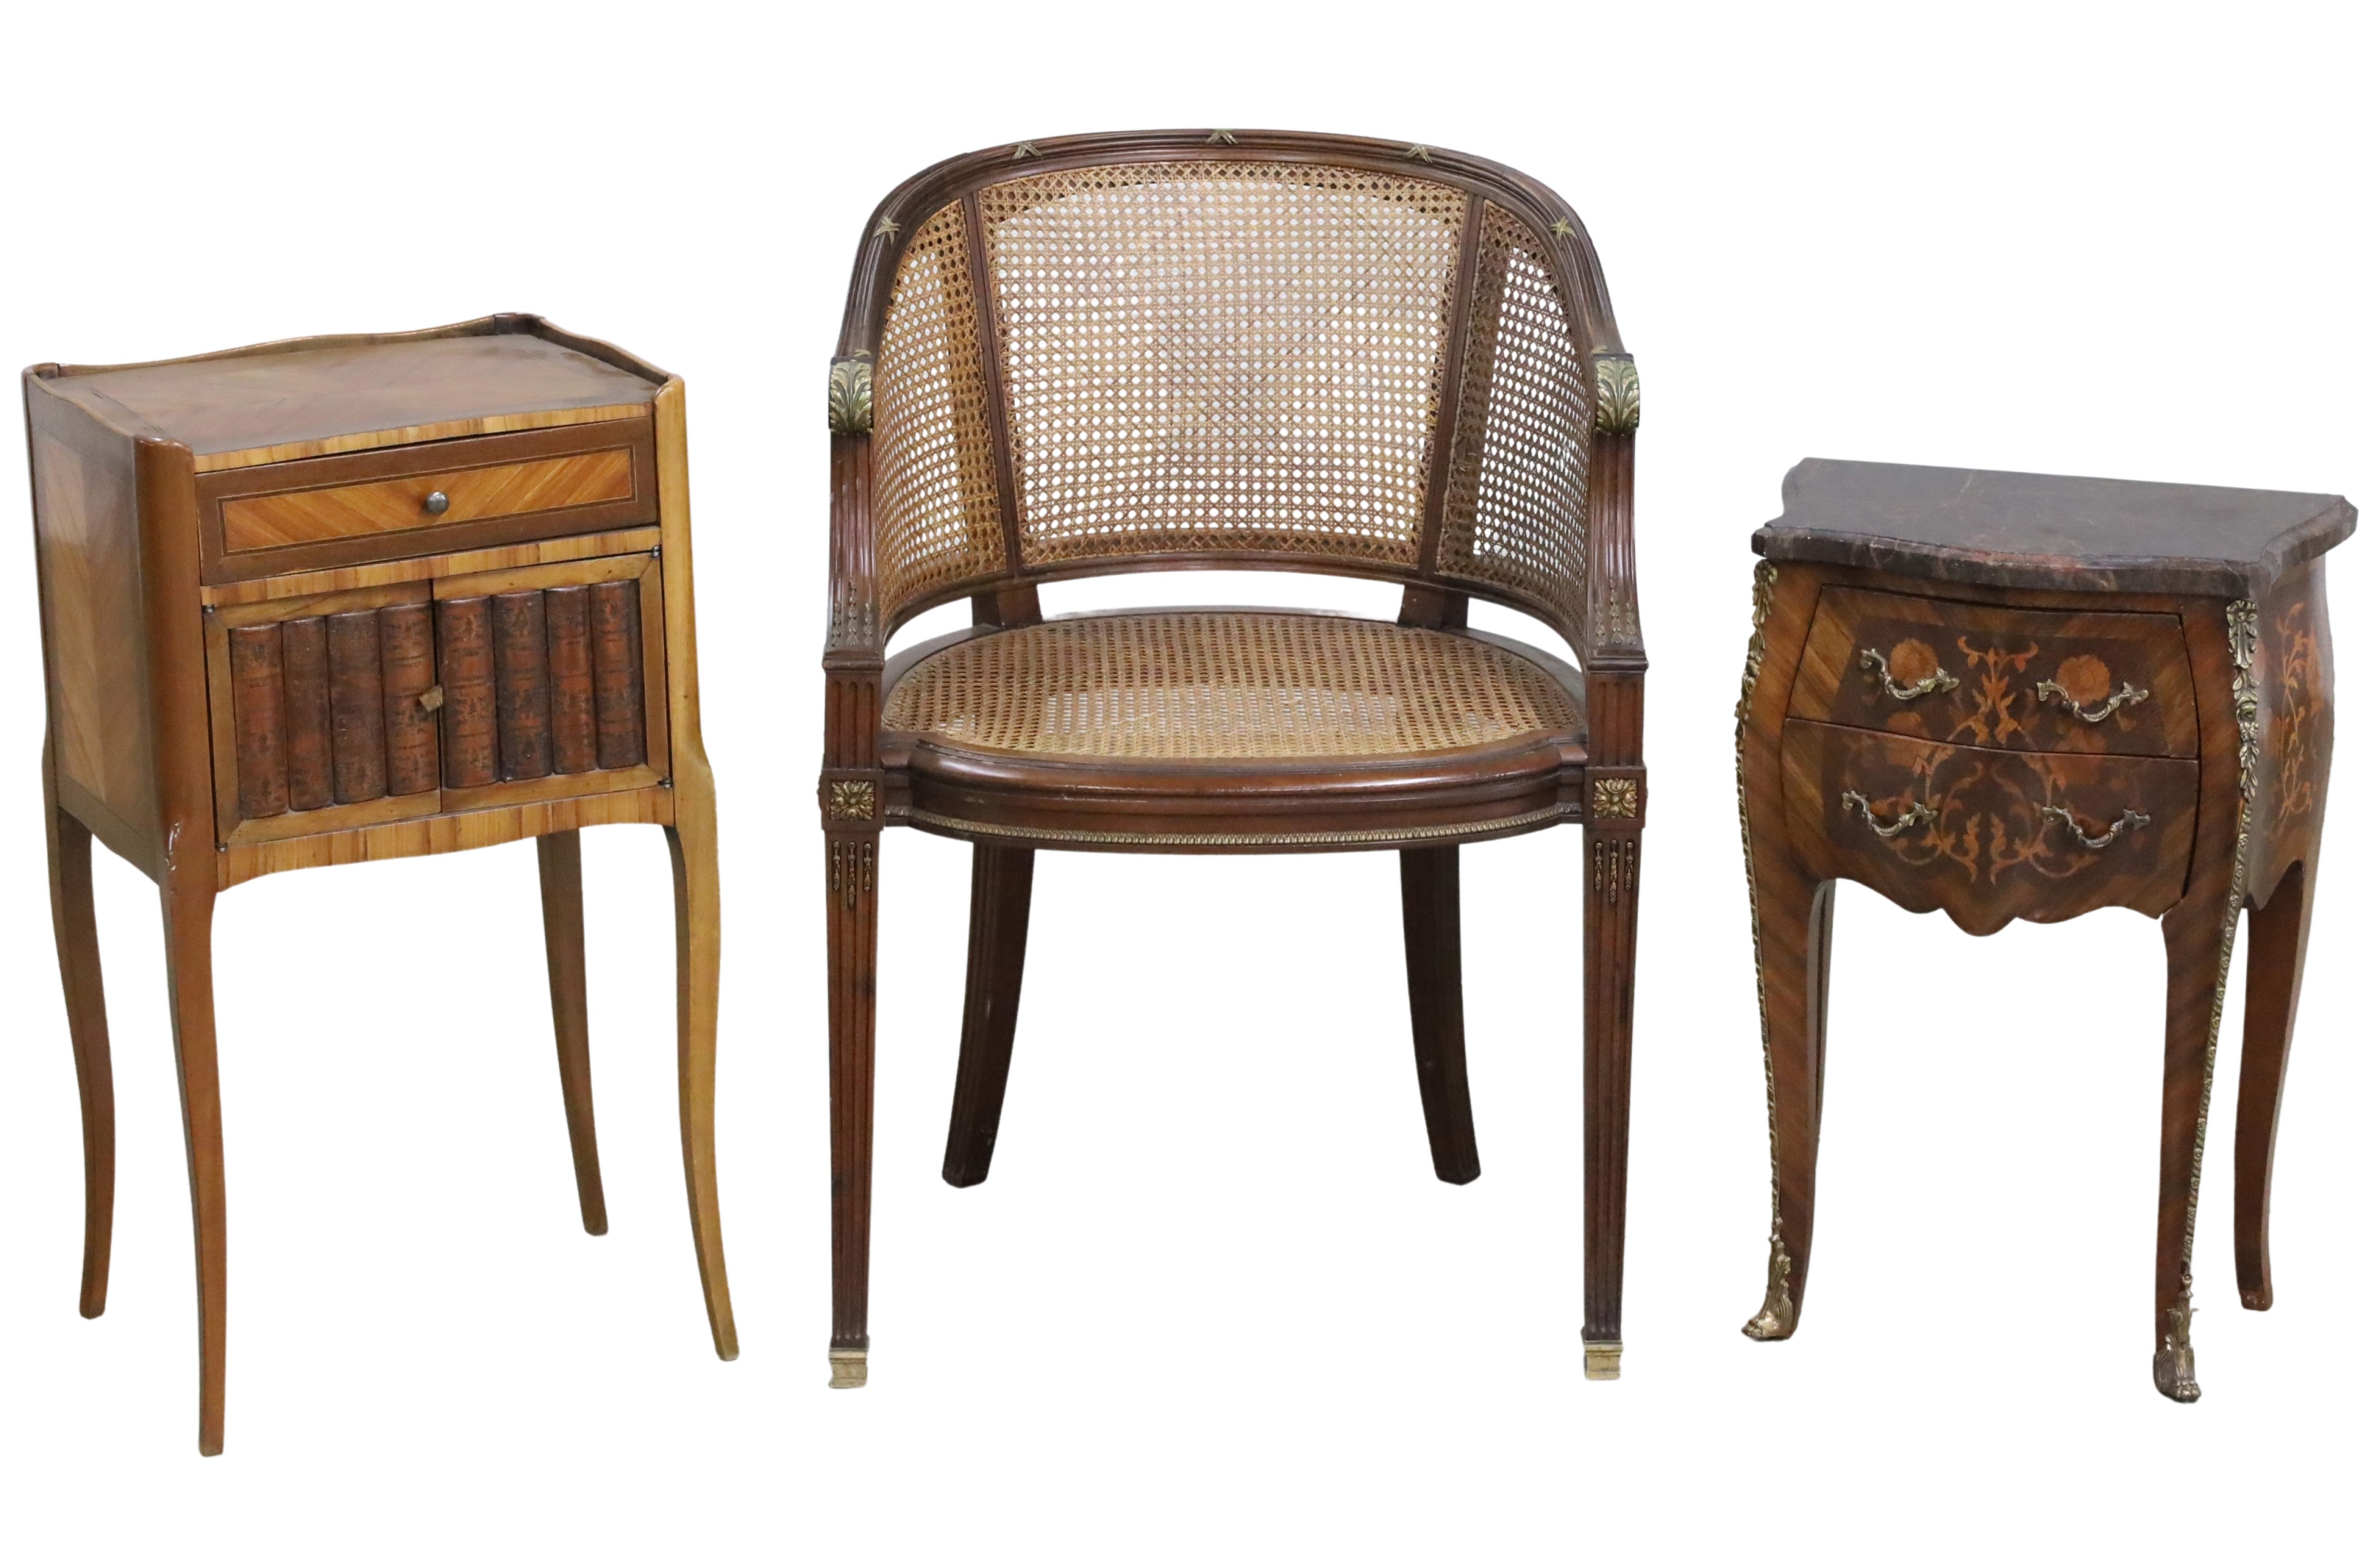 3 PC LOT OF FRENCH FURNITURE A 2f8d57